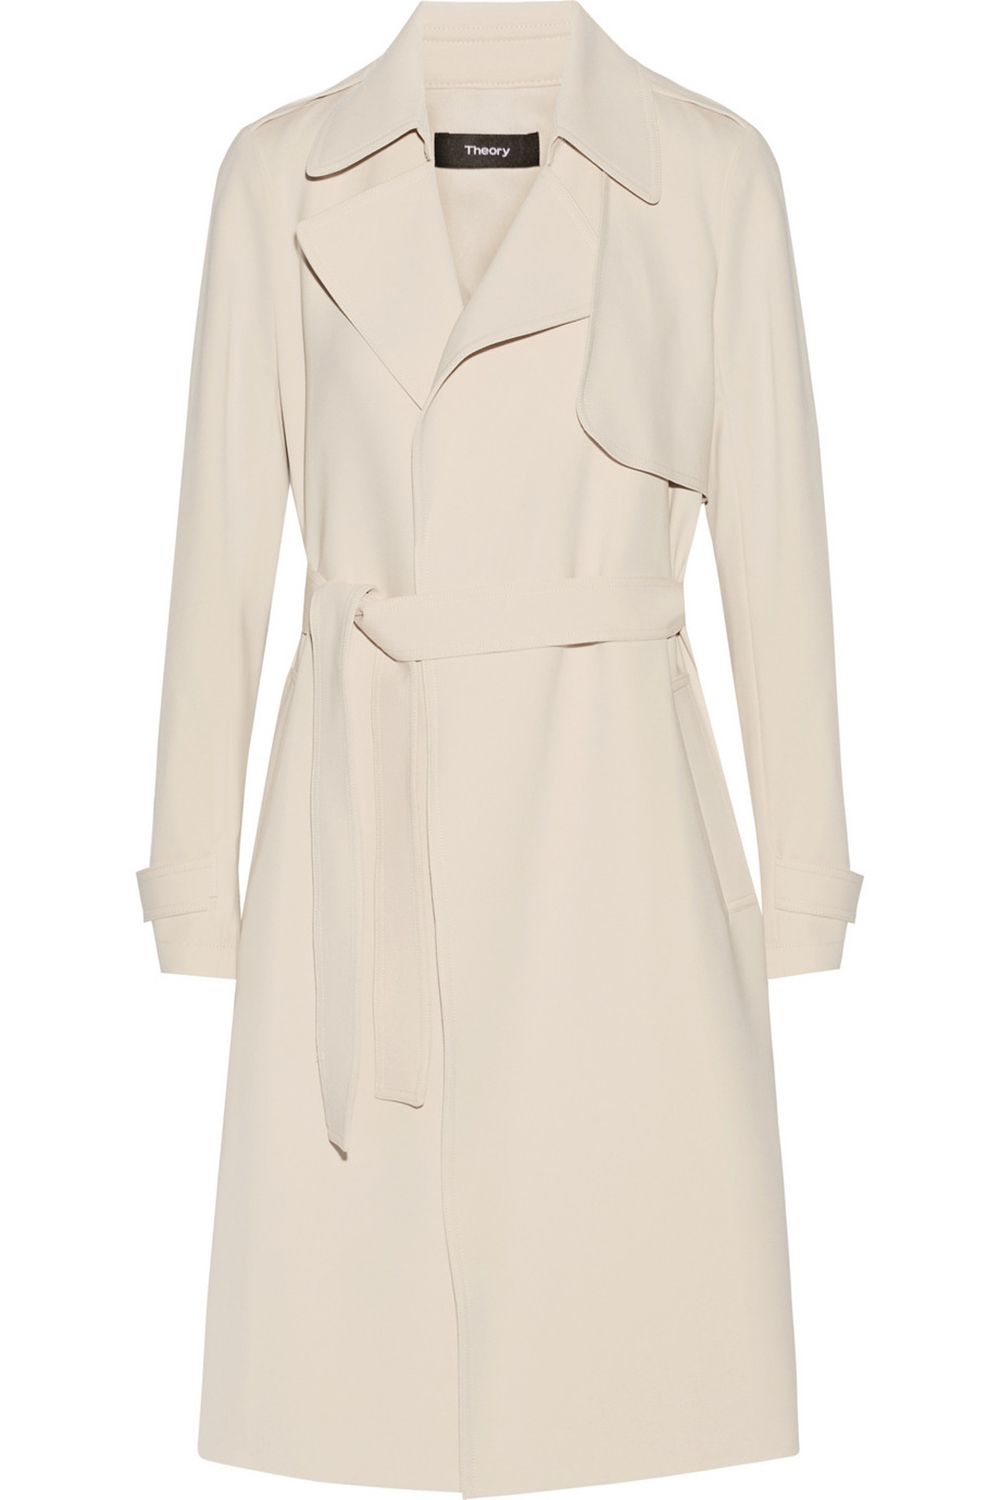 The Jacket for Now: The Soft Trench - The Soft Trench is the New